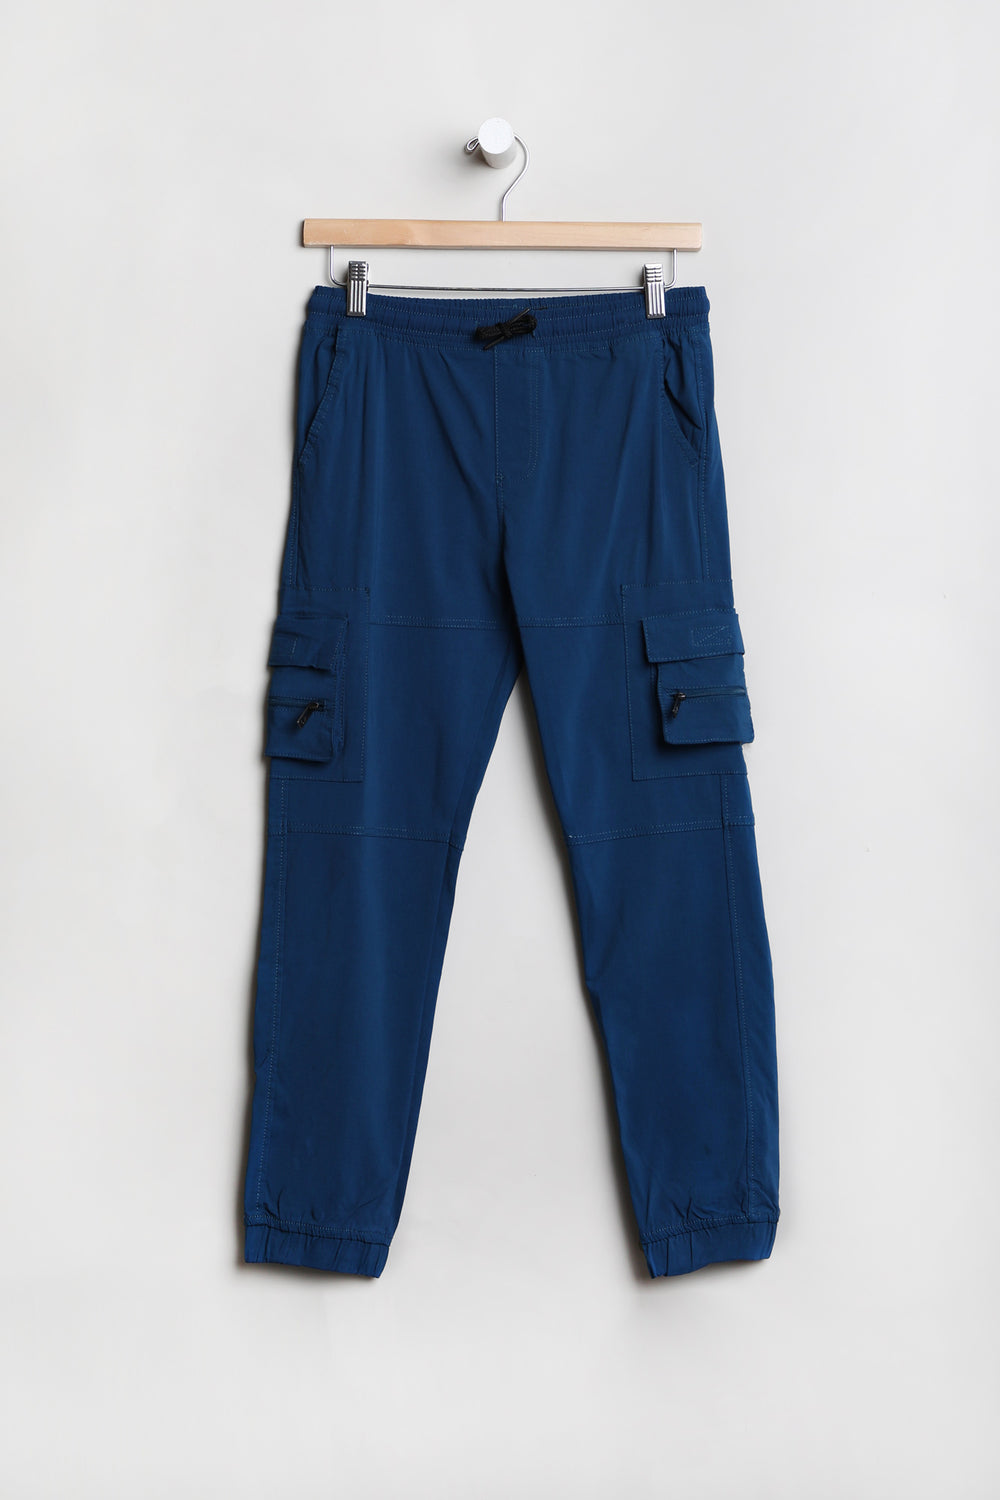 West49 Youth Twill Zip Cargo Jogger West49 Youth Twill Zip Cargo Jogger